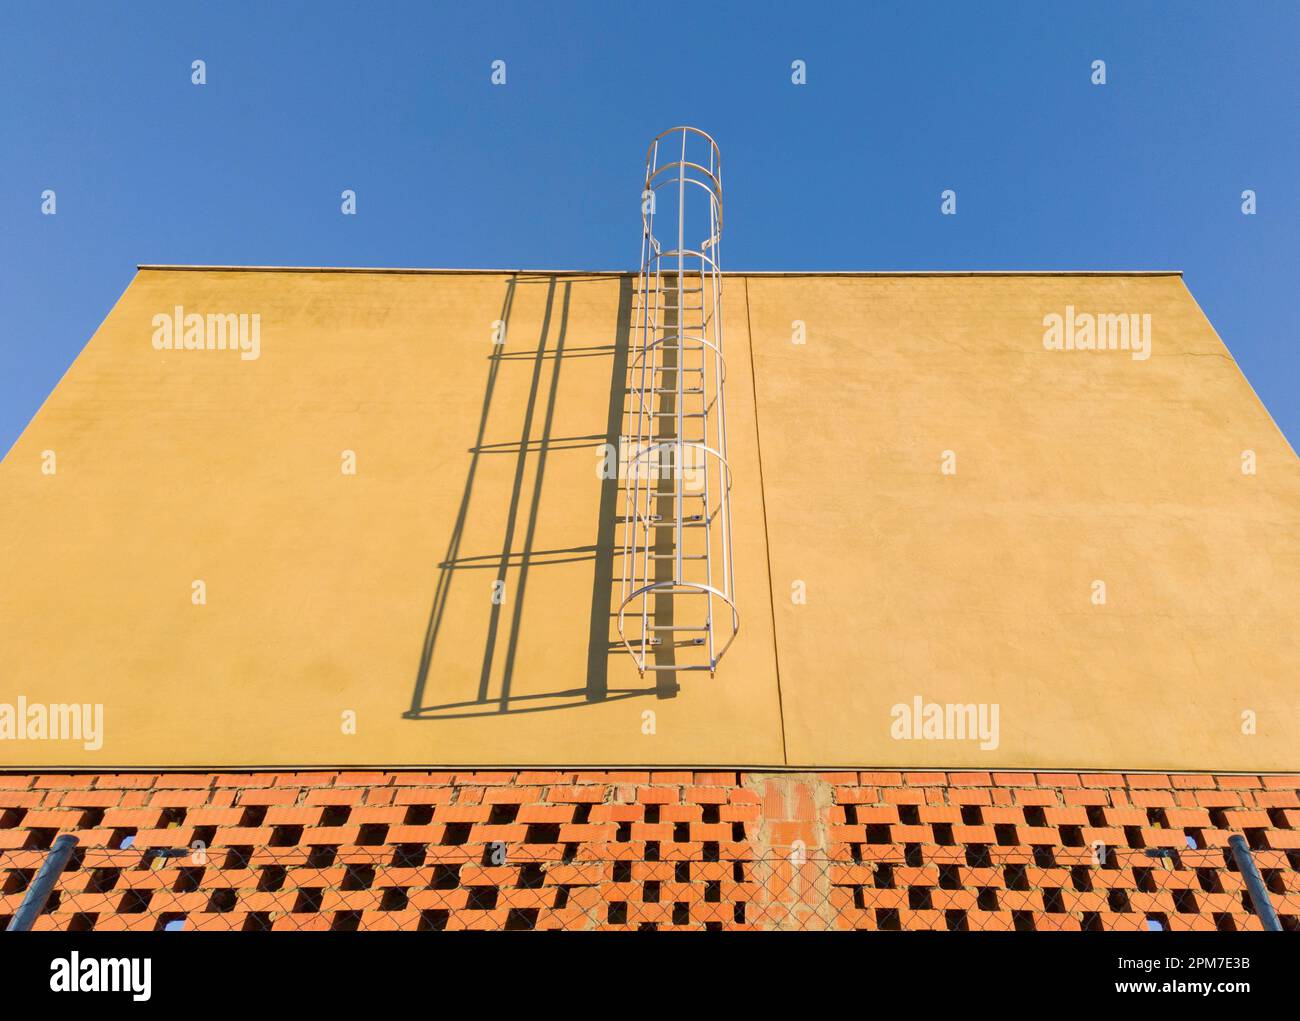 Service ladder installed on a commercial premises under construction. Blue sky background. Stock Photo